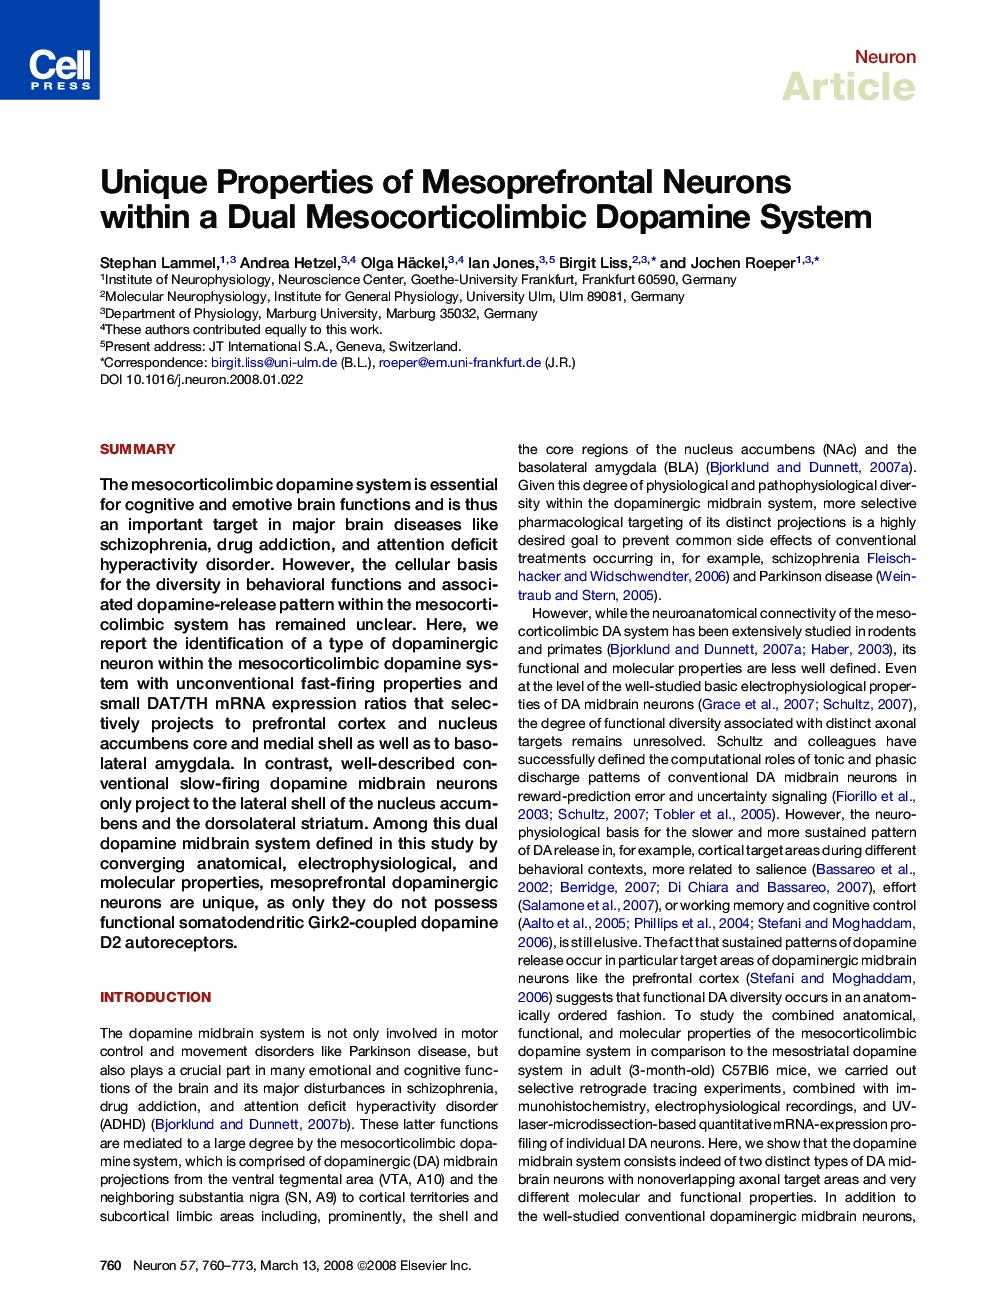 Unique Properties of Mesoprefrontal Neurons within a Dual Mesocorticolimbic Dopamine System